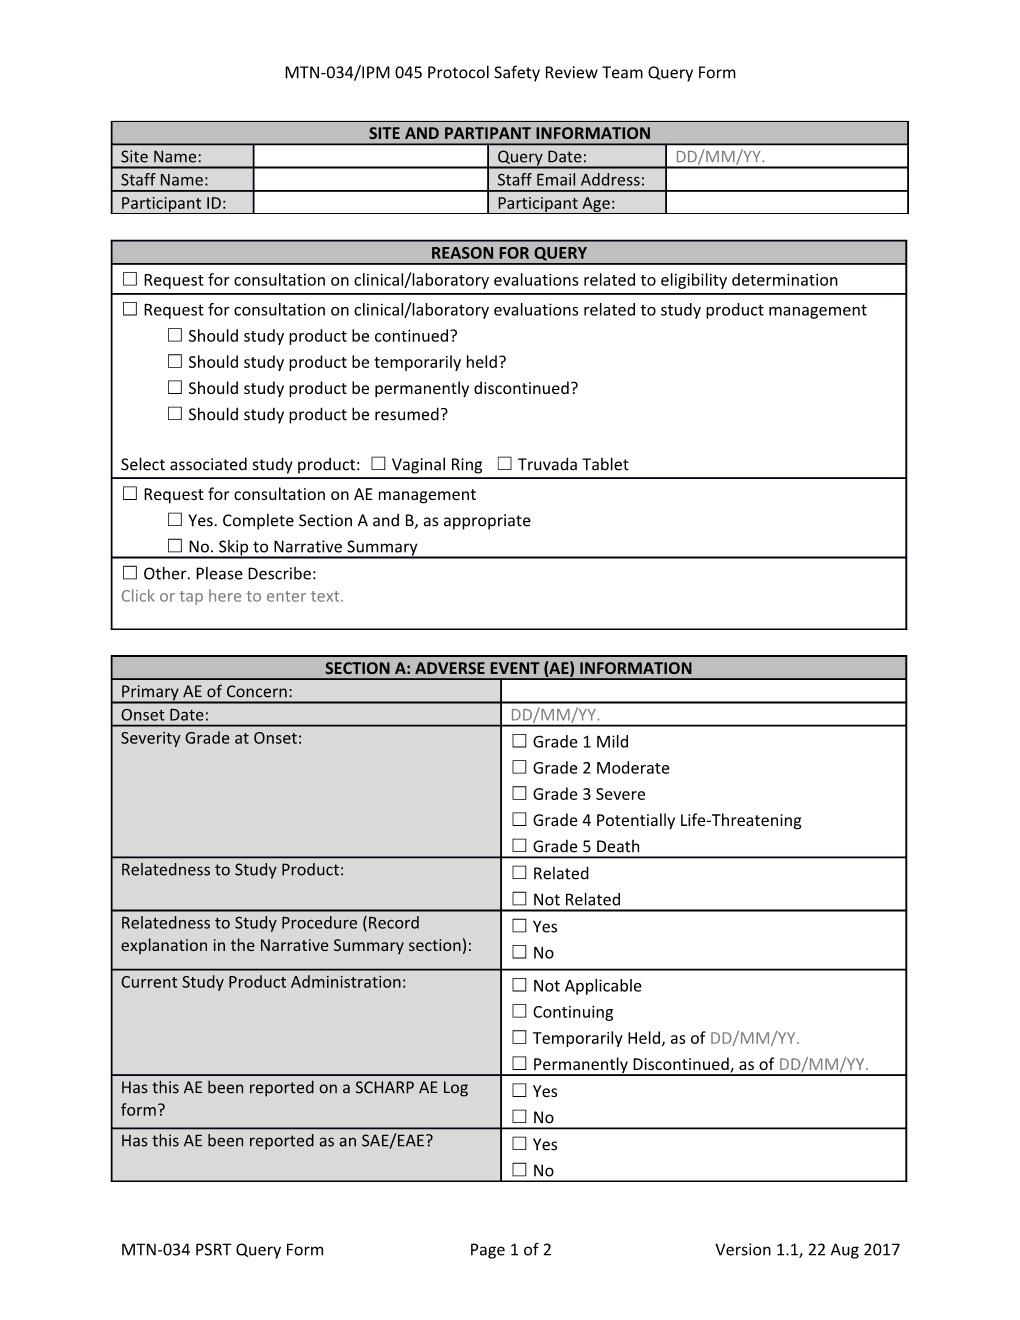 MTN-034/IPM 045 Protocol Safety Review Team Query Form